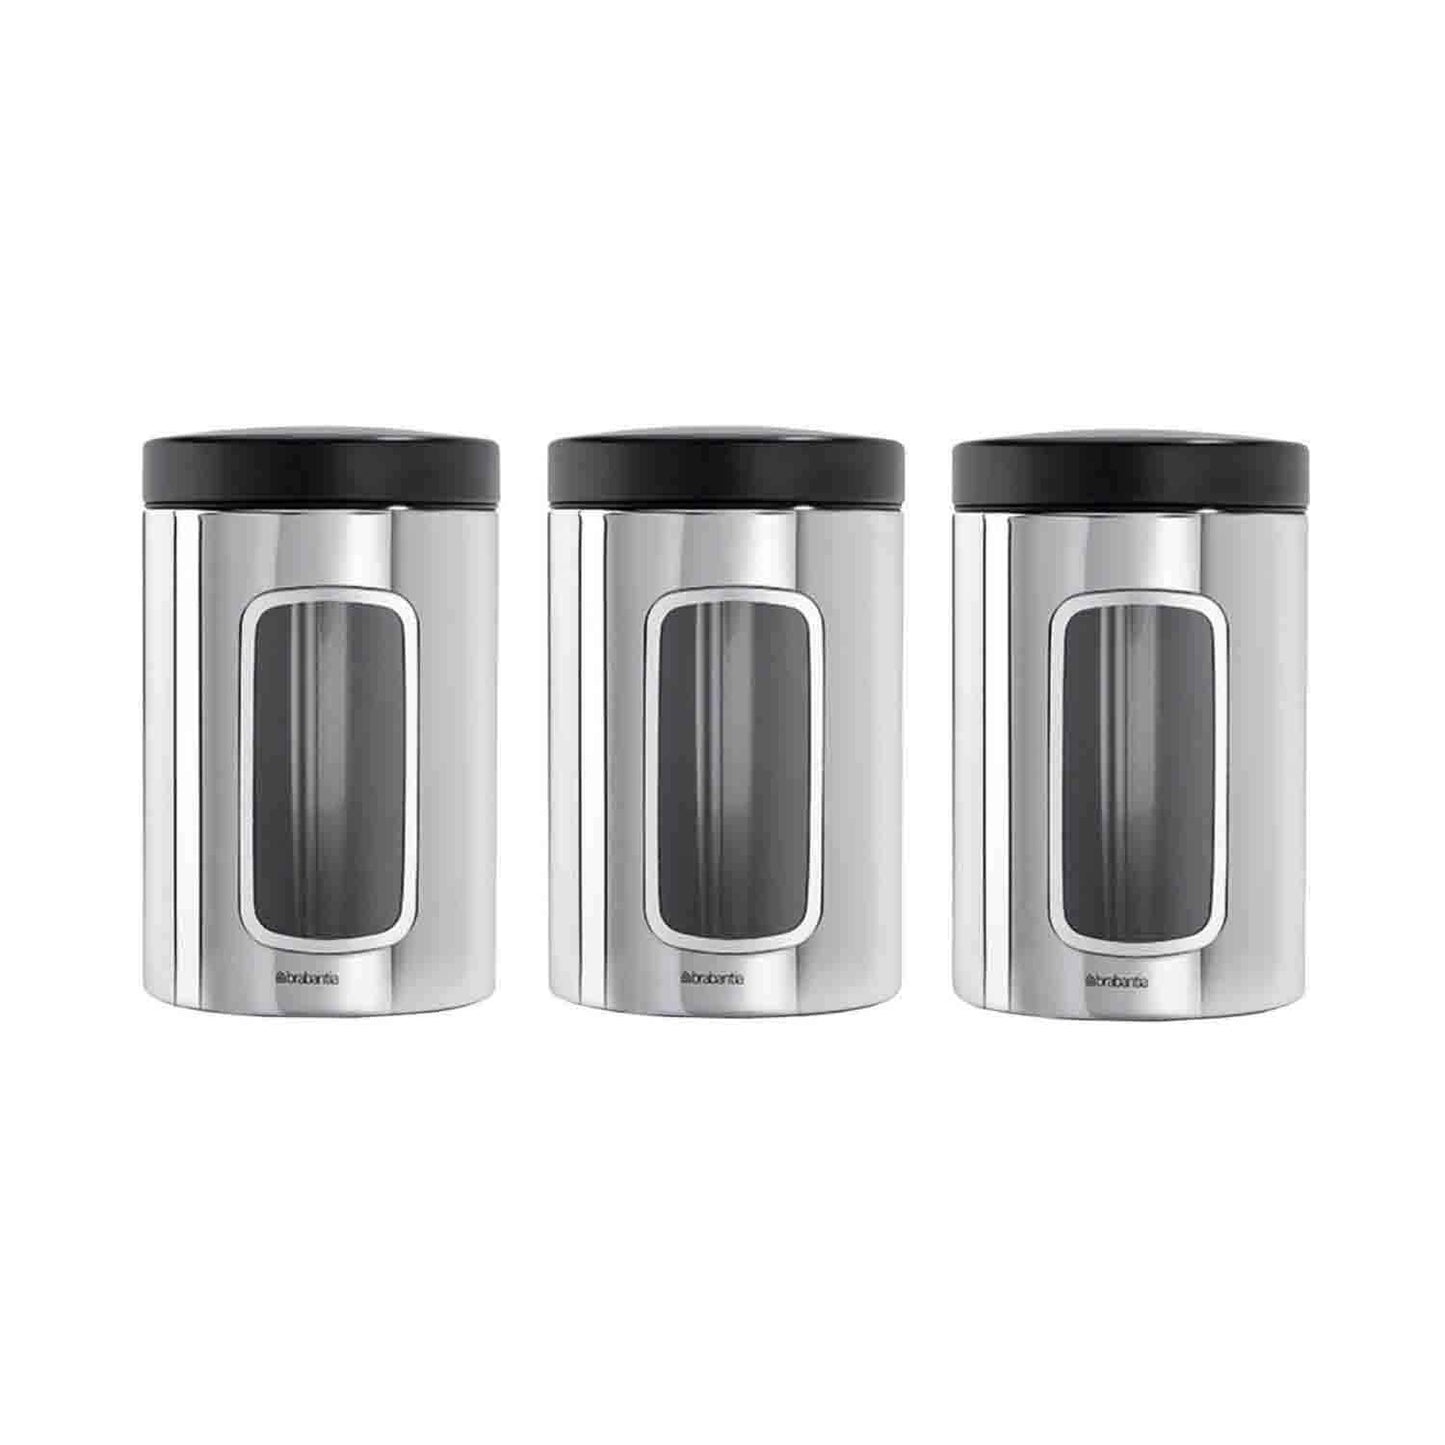 Brabantia Window Food Containers, Set of 3, 1.4 litre